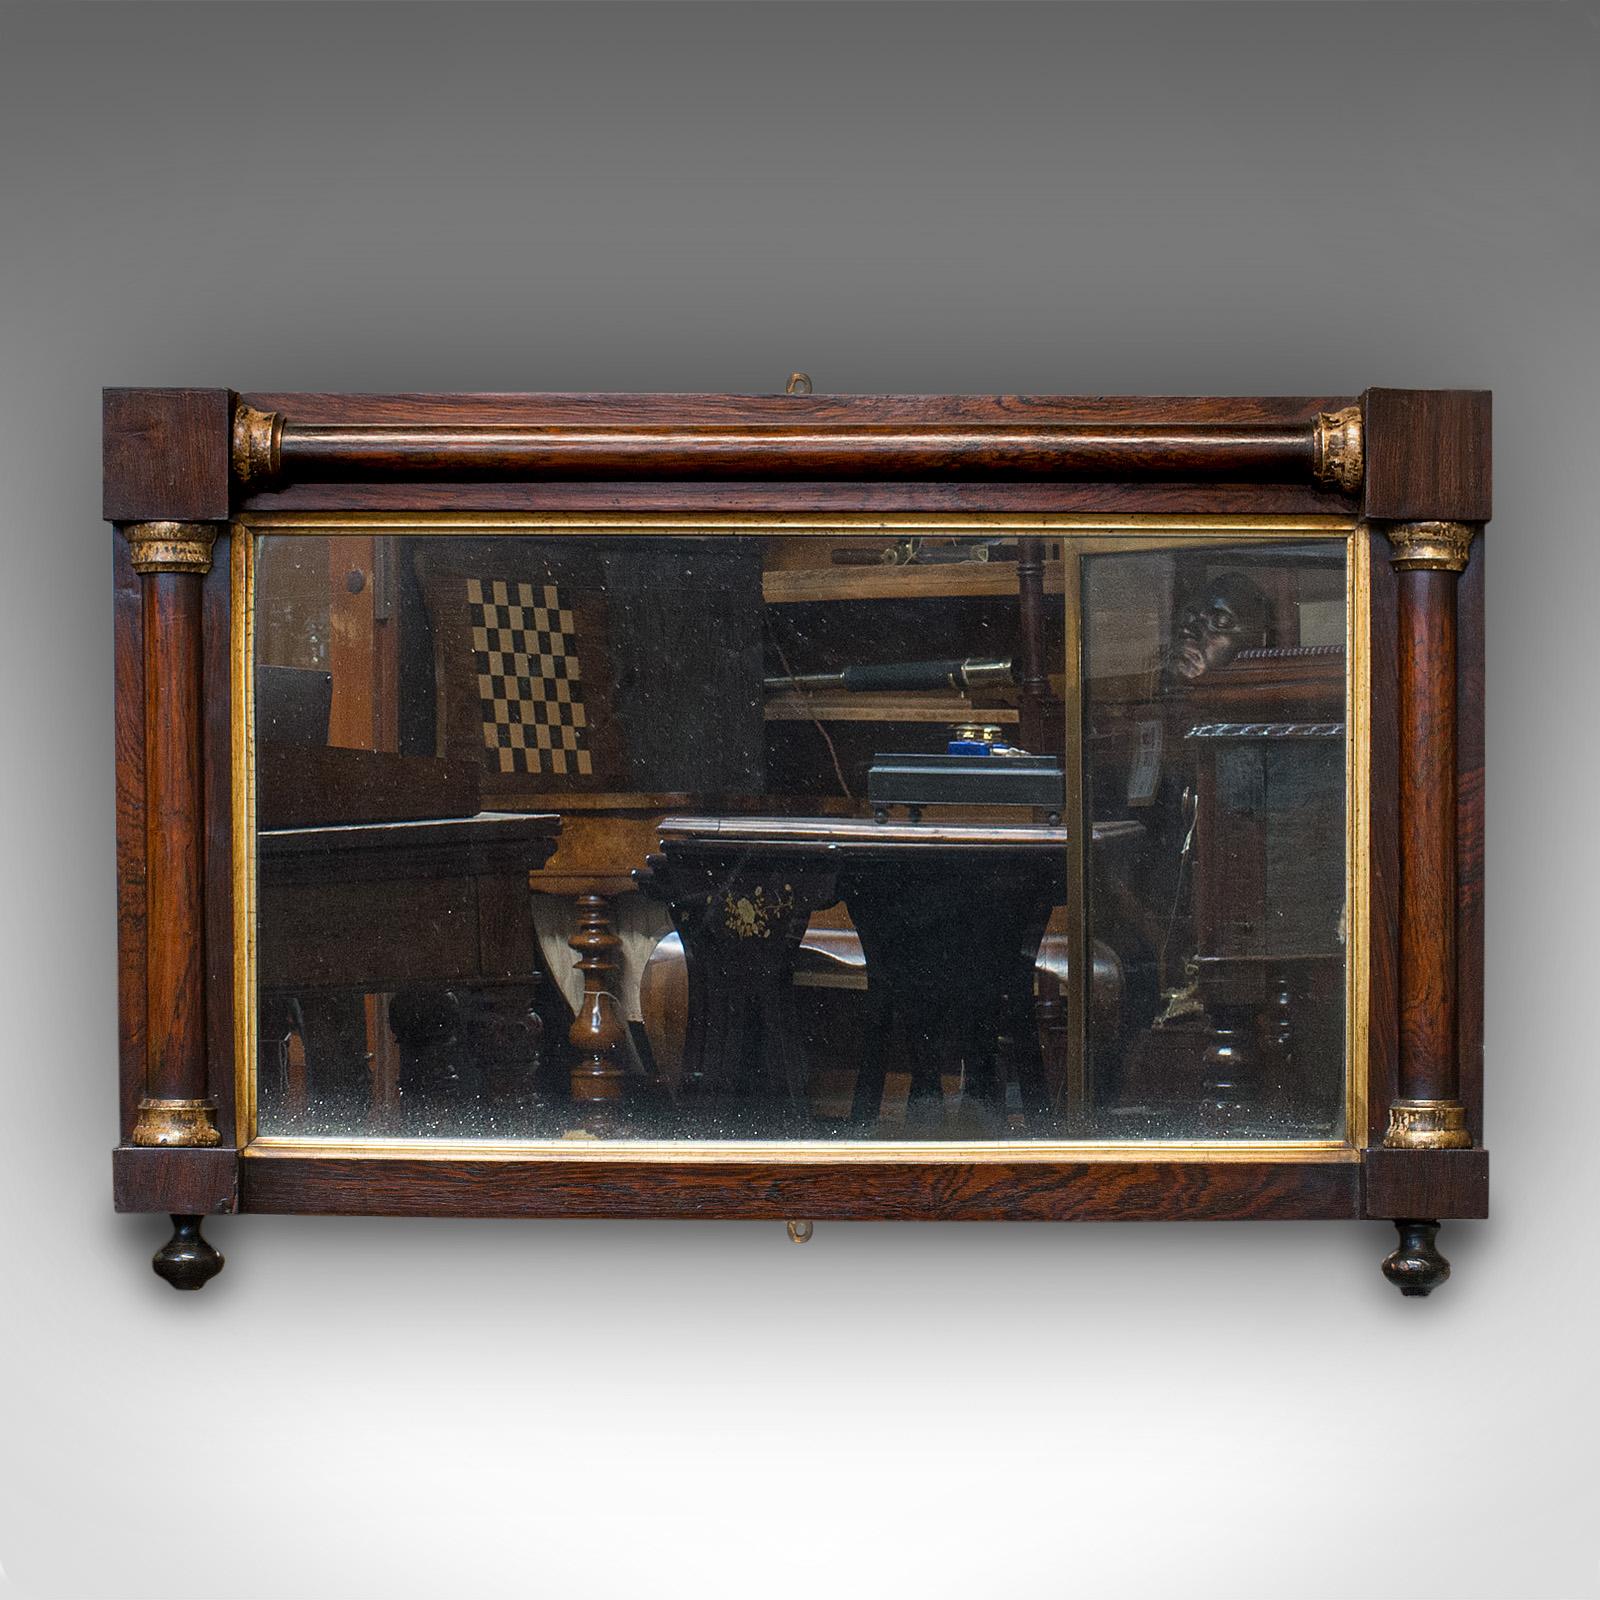 This is an antique overmantel mirror. An English, Rosewood and glass rectangular mirror, dating to the Regency period, circa 1820.

Generously sized and pleasingly foxed
Displaying a desirable aged patina
Rosewood shows fine grain interest and